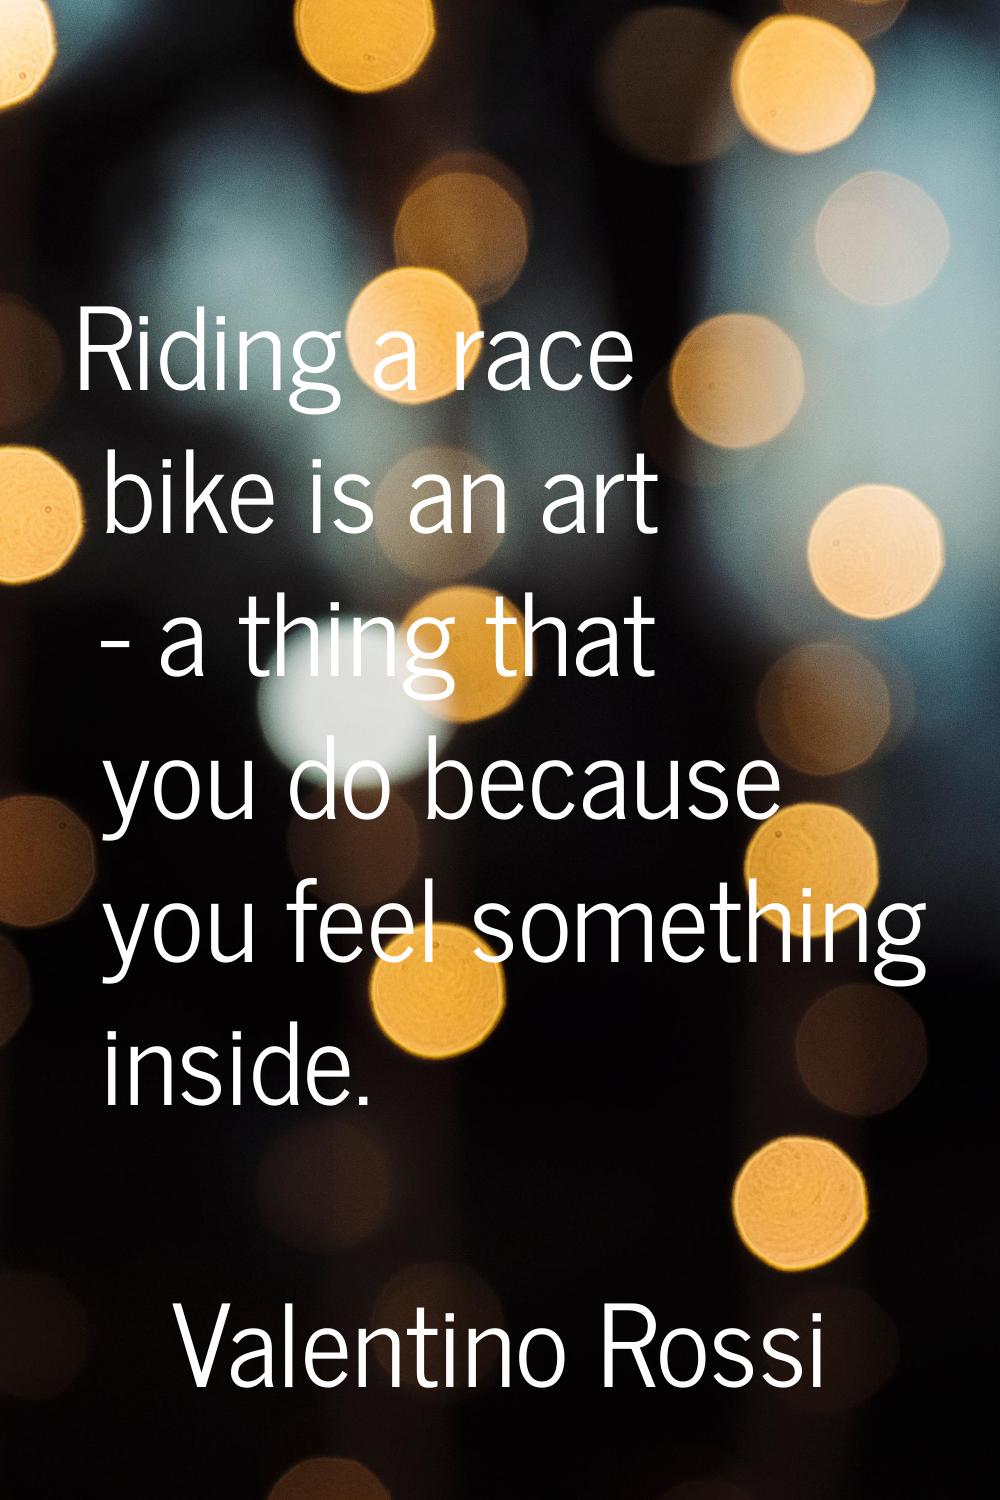 Riding a race bike is an art - a thing that you do because you feel something inside.